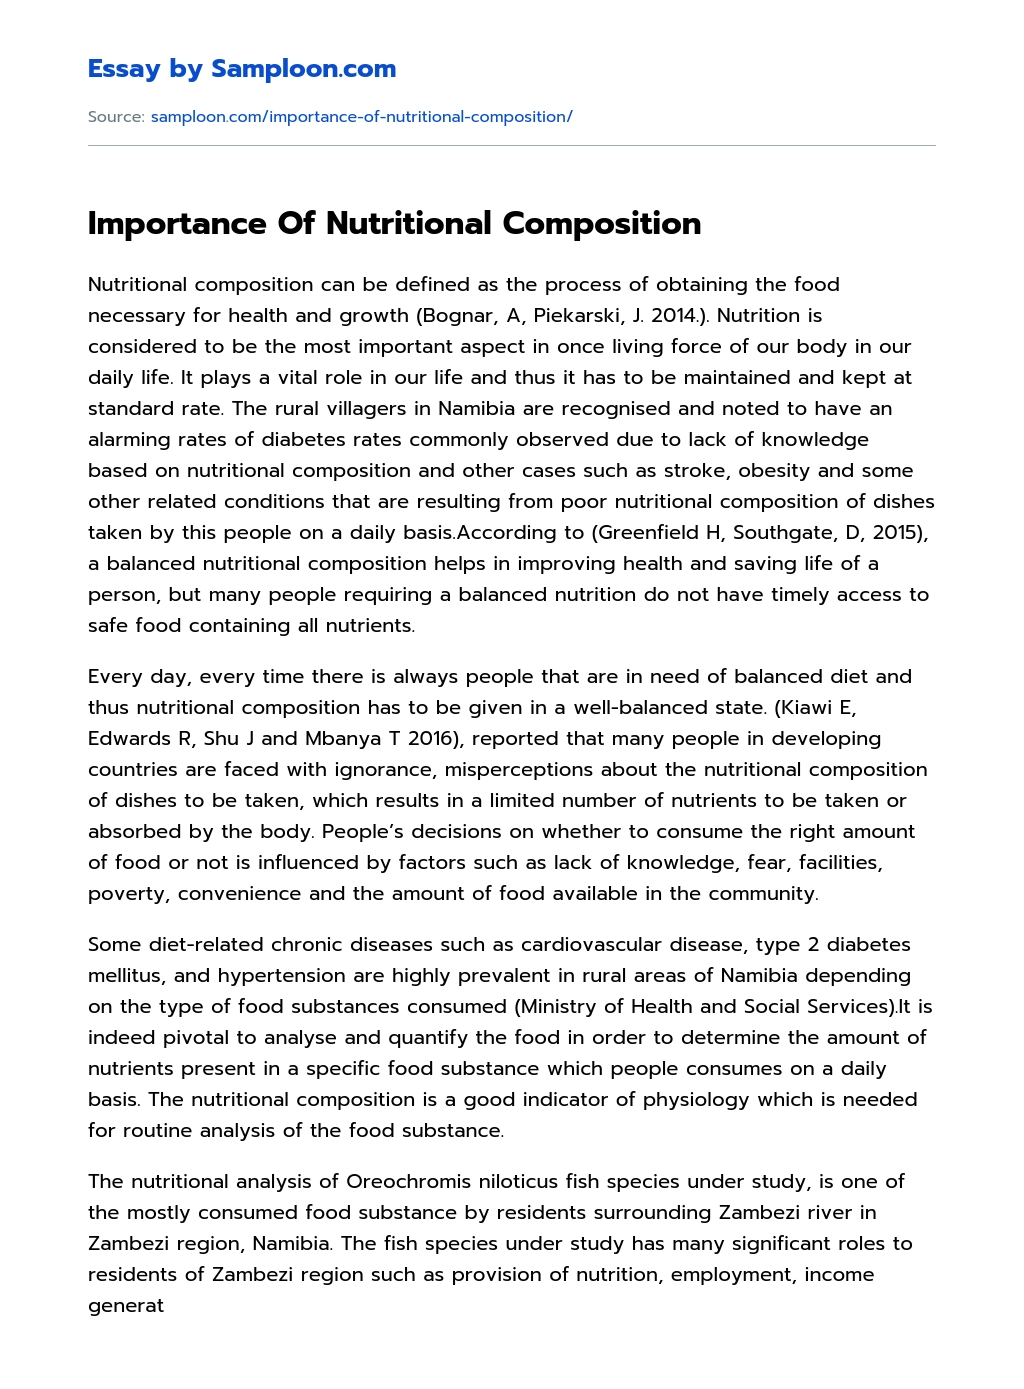 Importance Of Nutritional Composition Analytical Essay essay